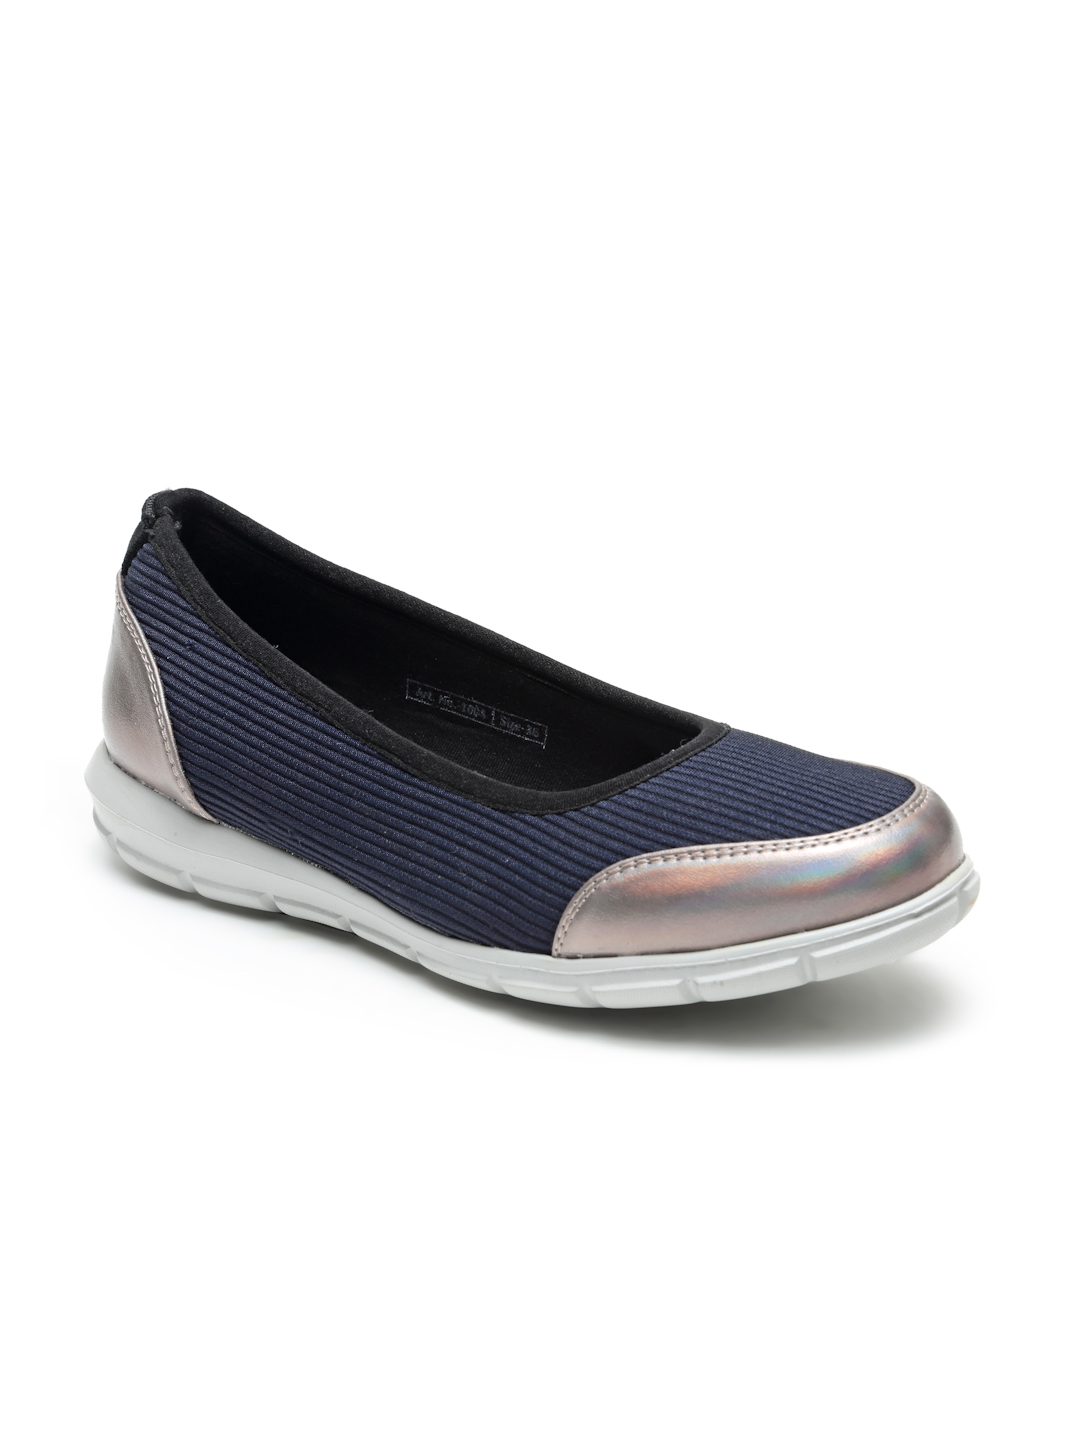 Buy Von Wellx Germany Comfort Women's Blue Casual Shoes Alice Online in Udaipur